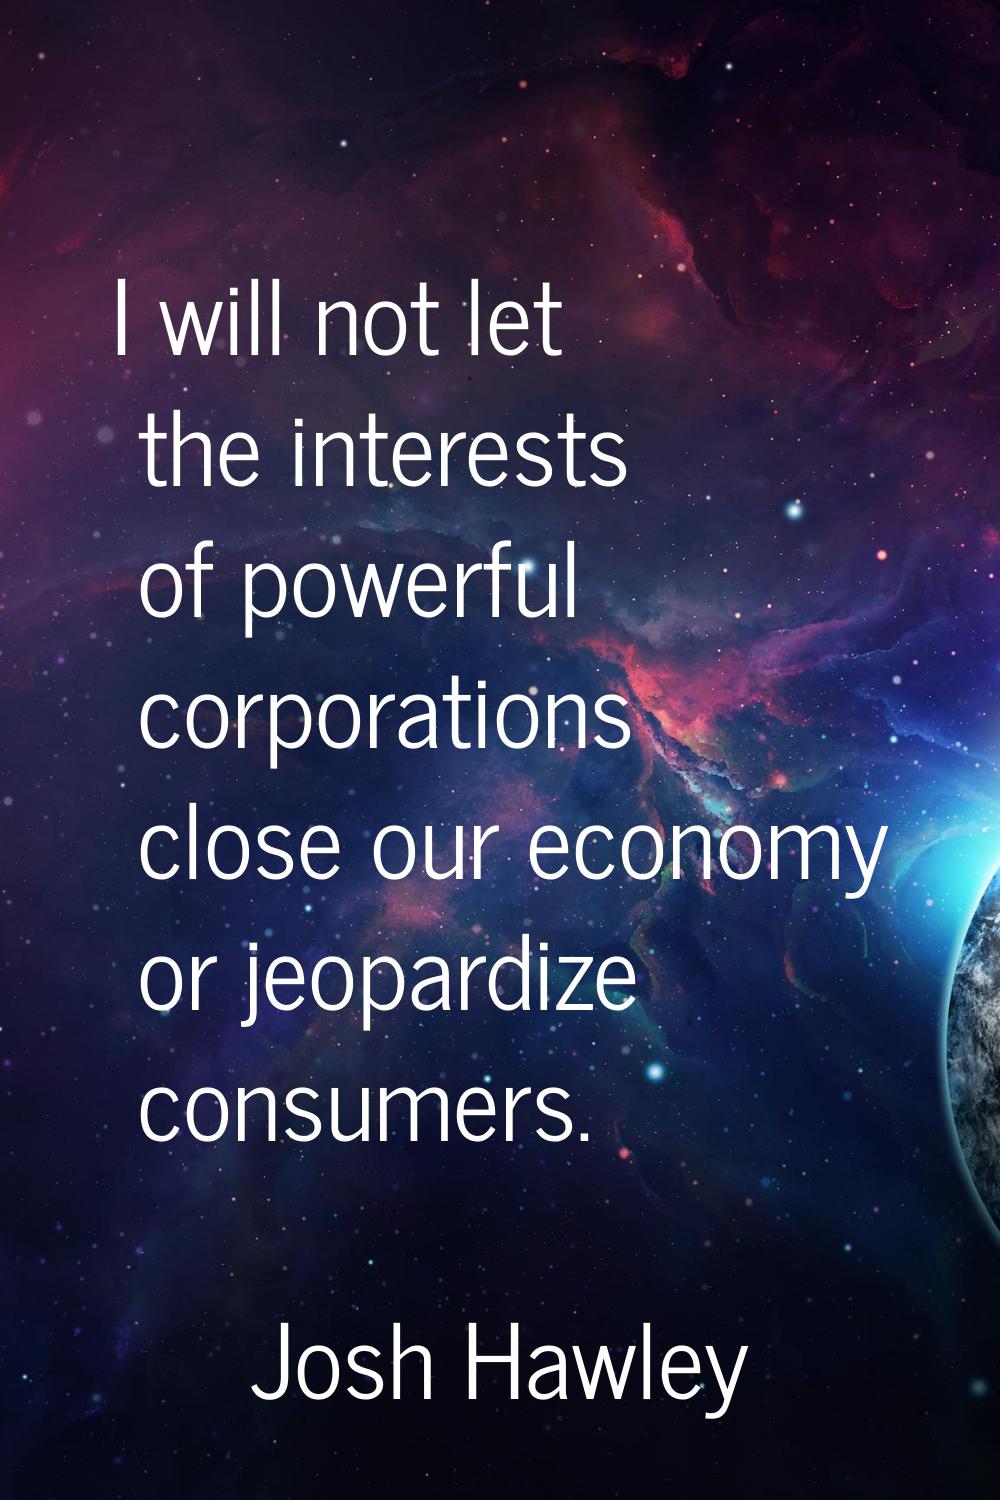 I will not let the interests of powerful corporations close our economy or jeopardize consumers.